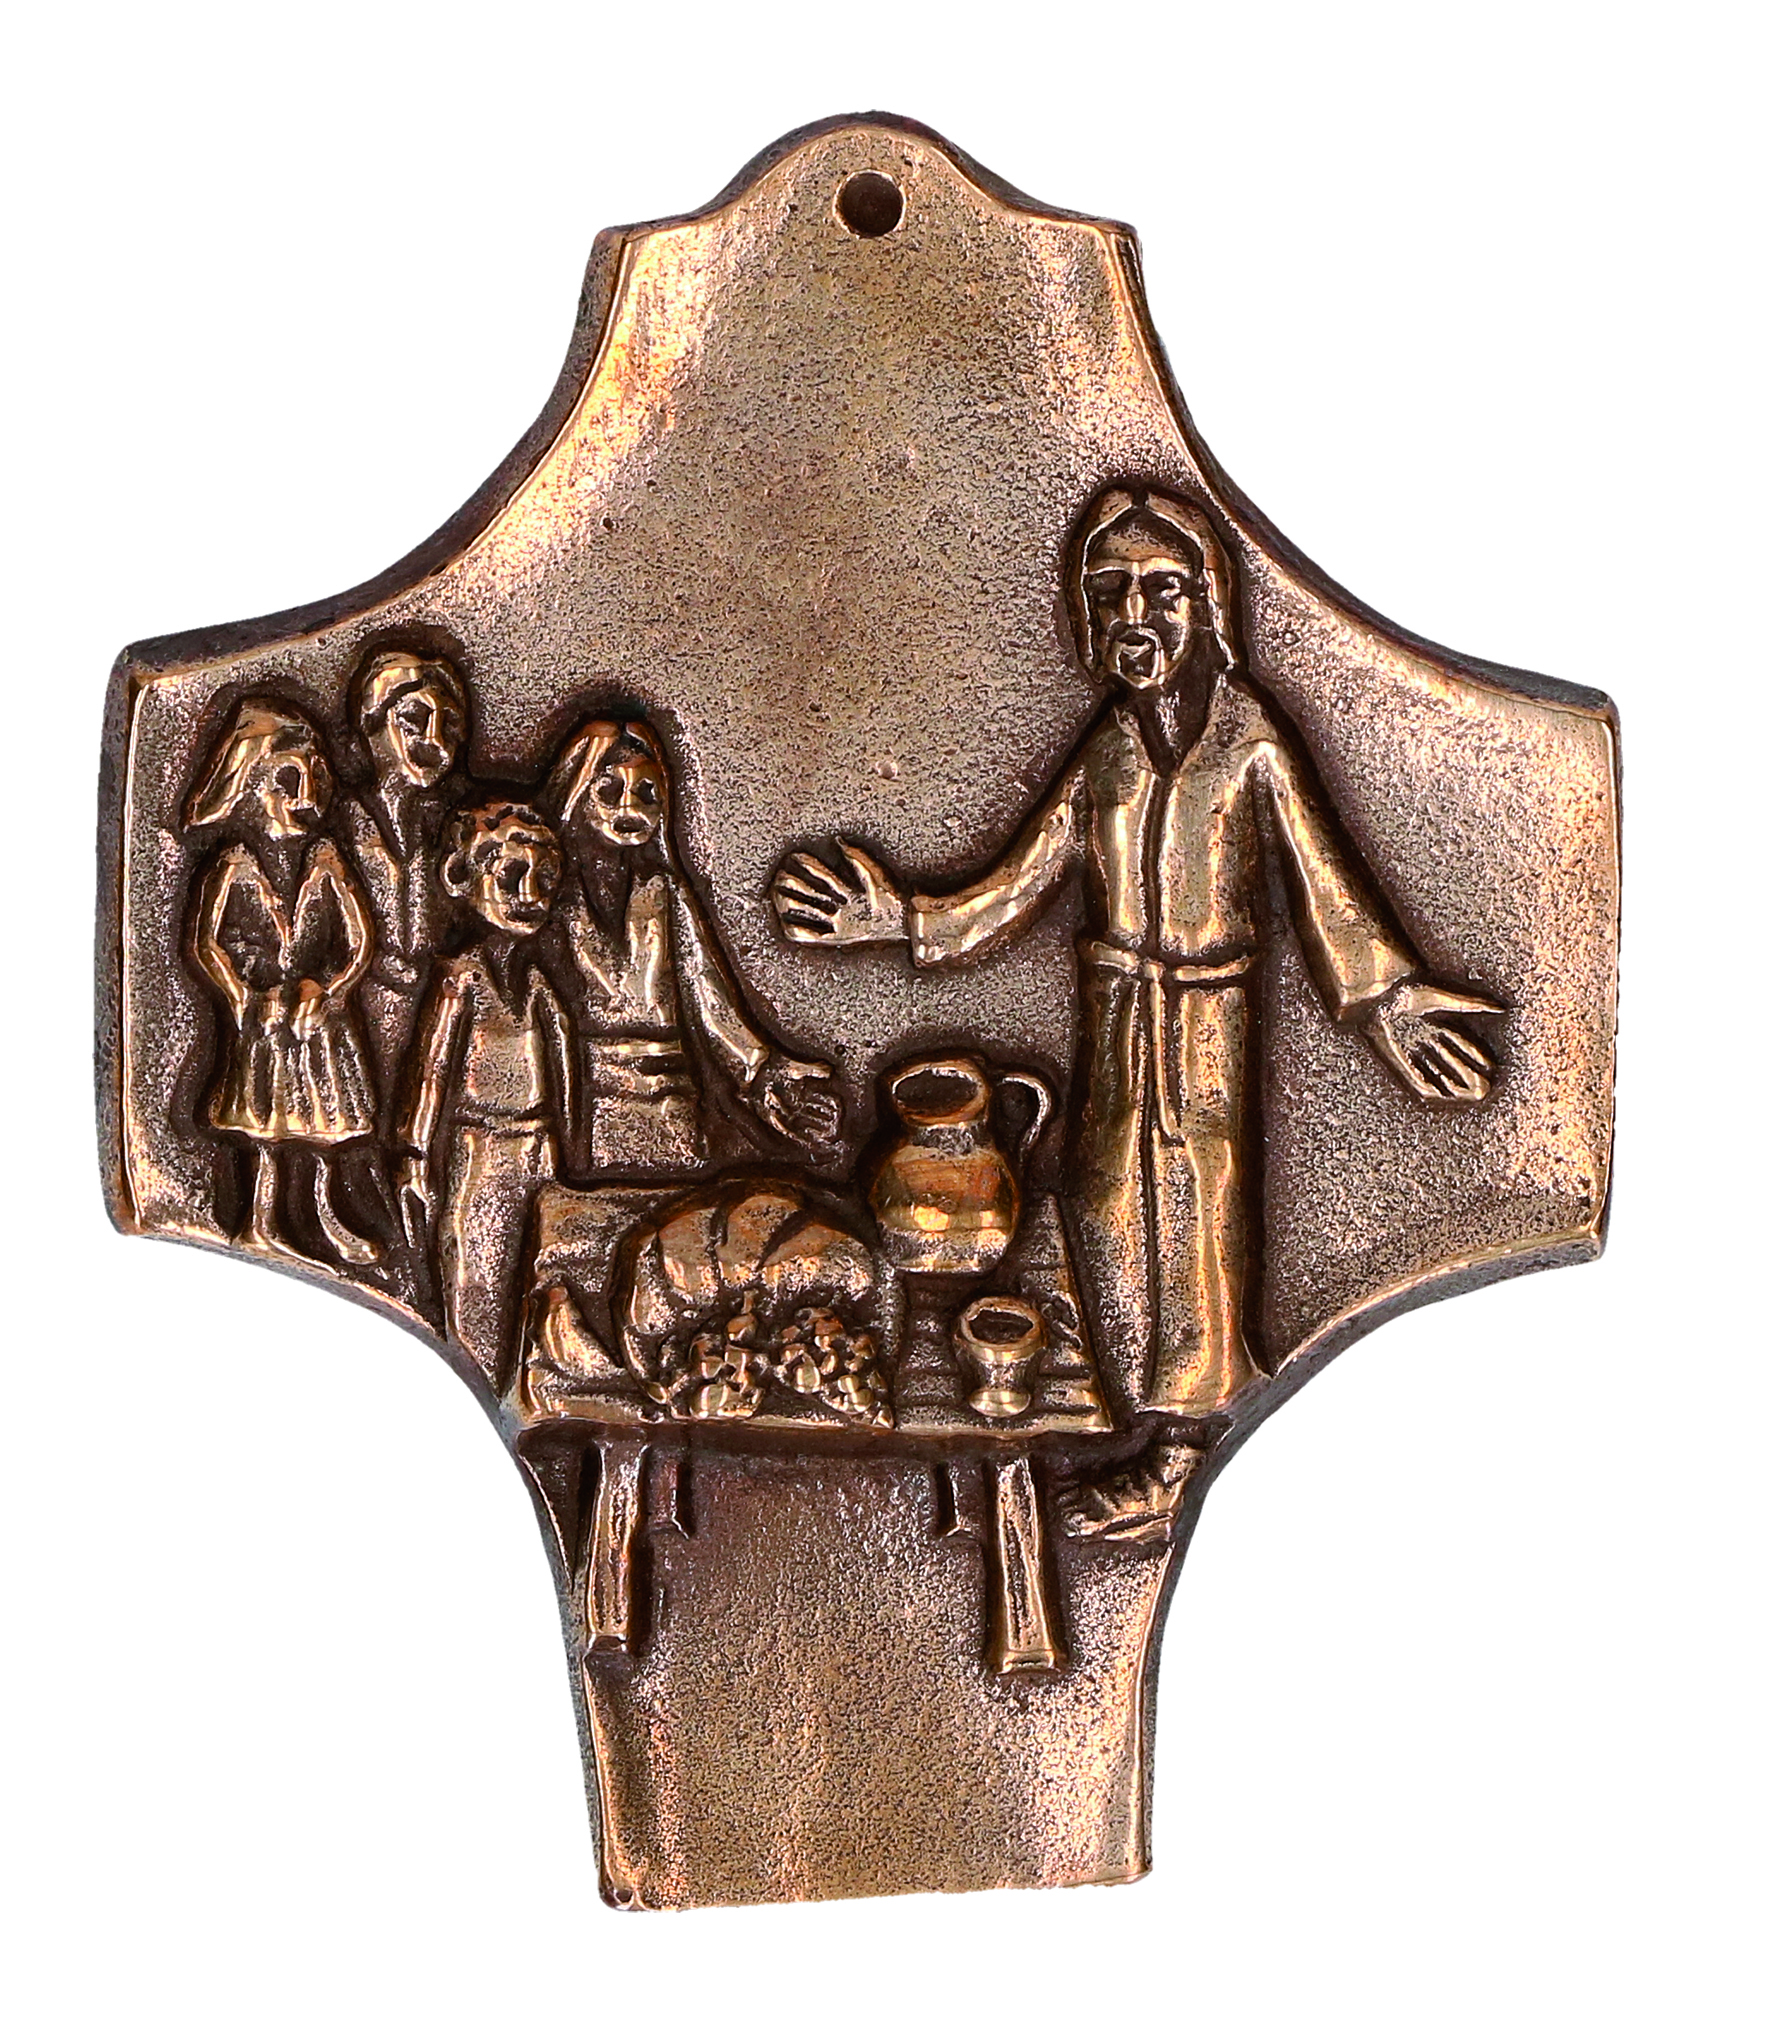 Bronze Communion’s Cross “Come and Behold”